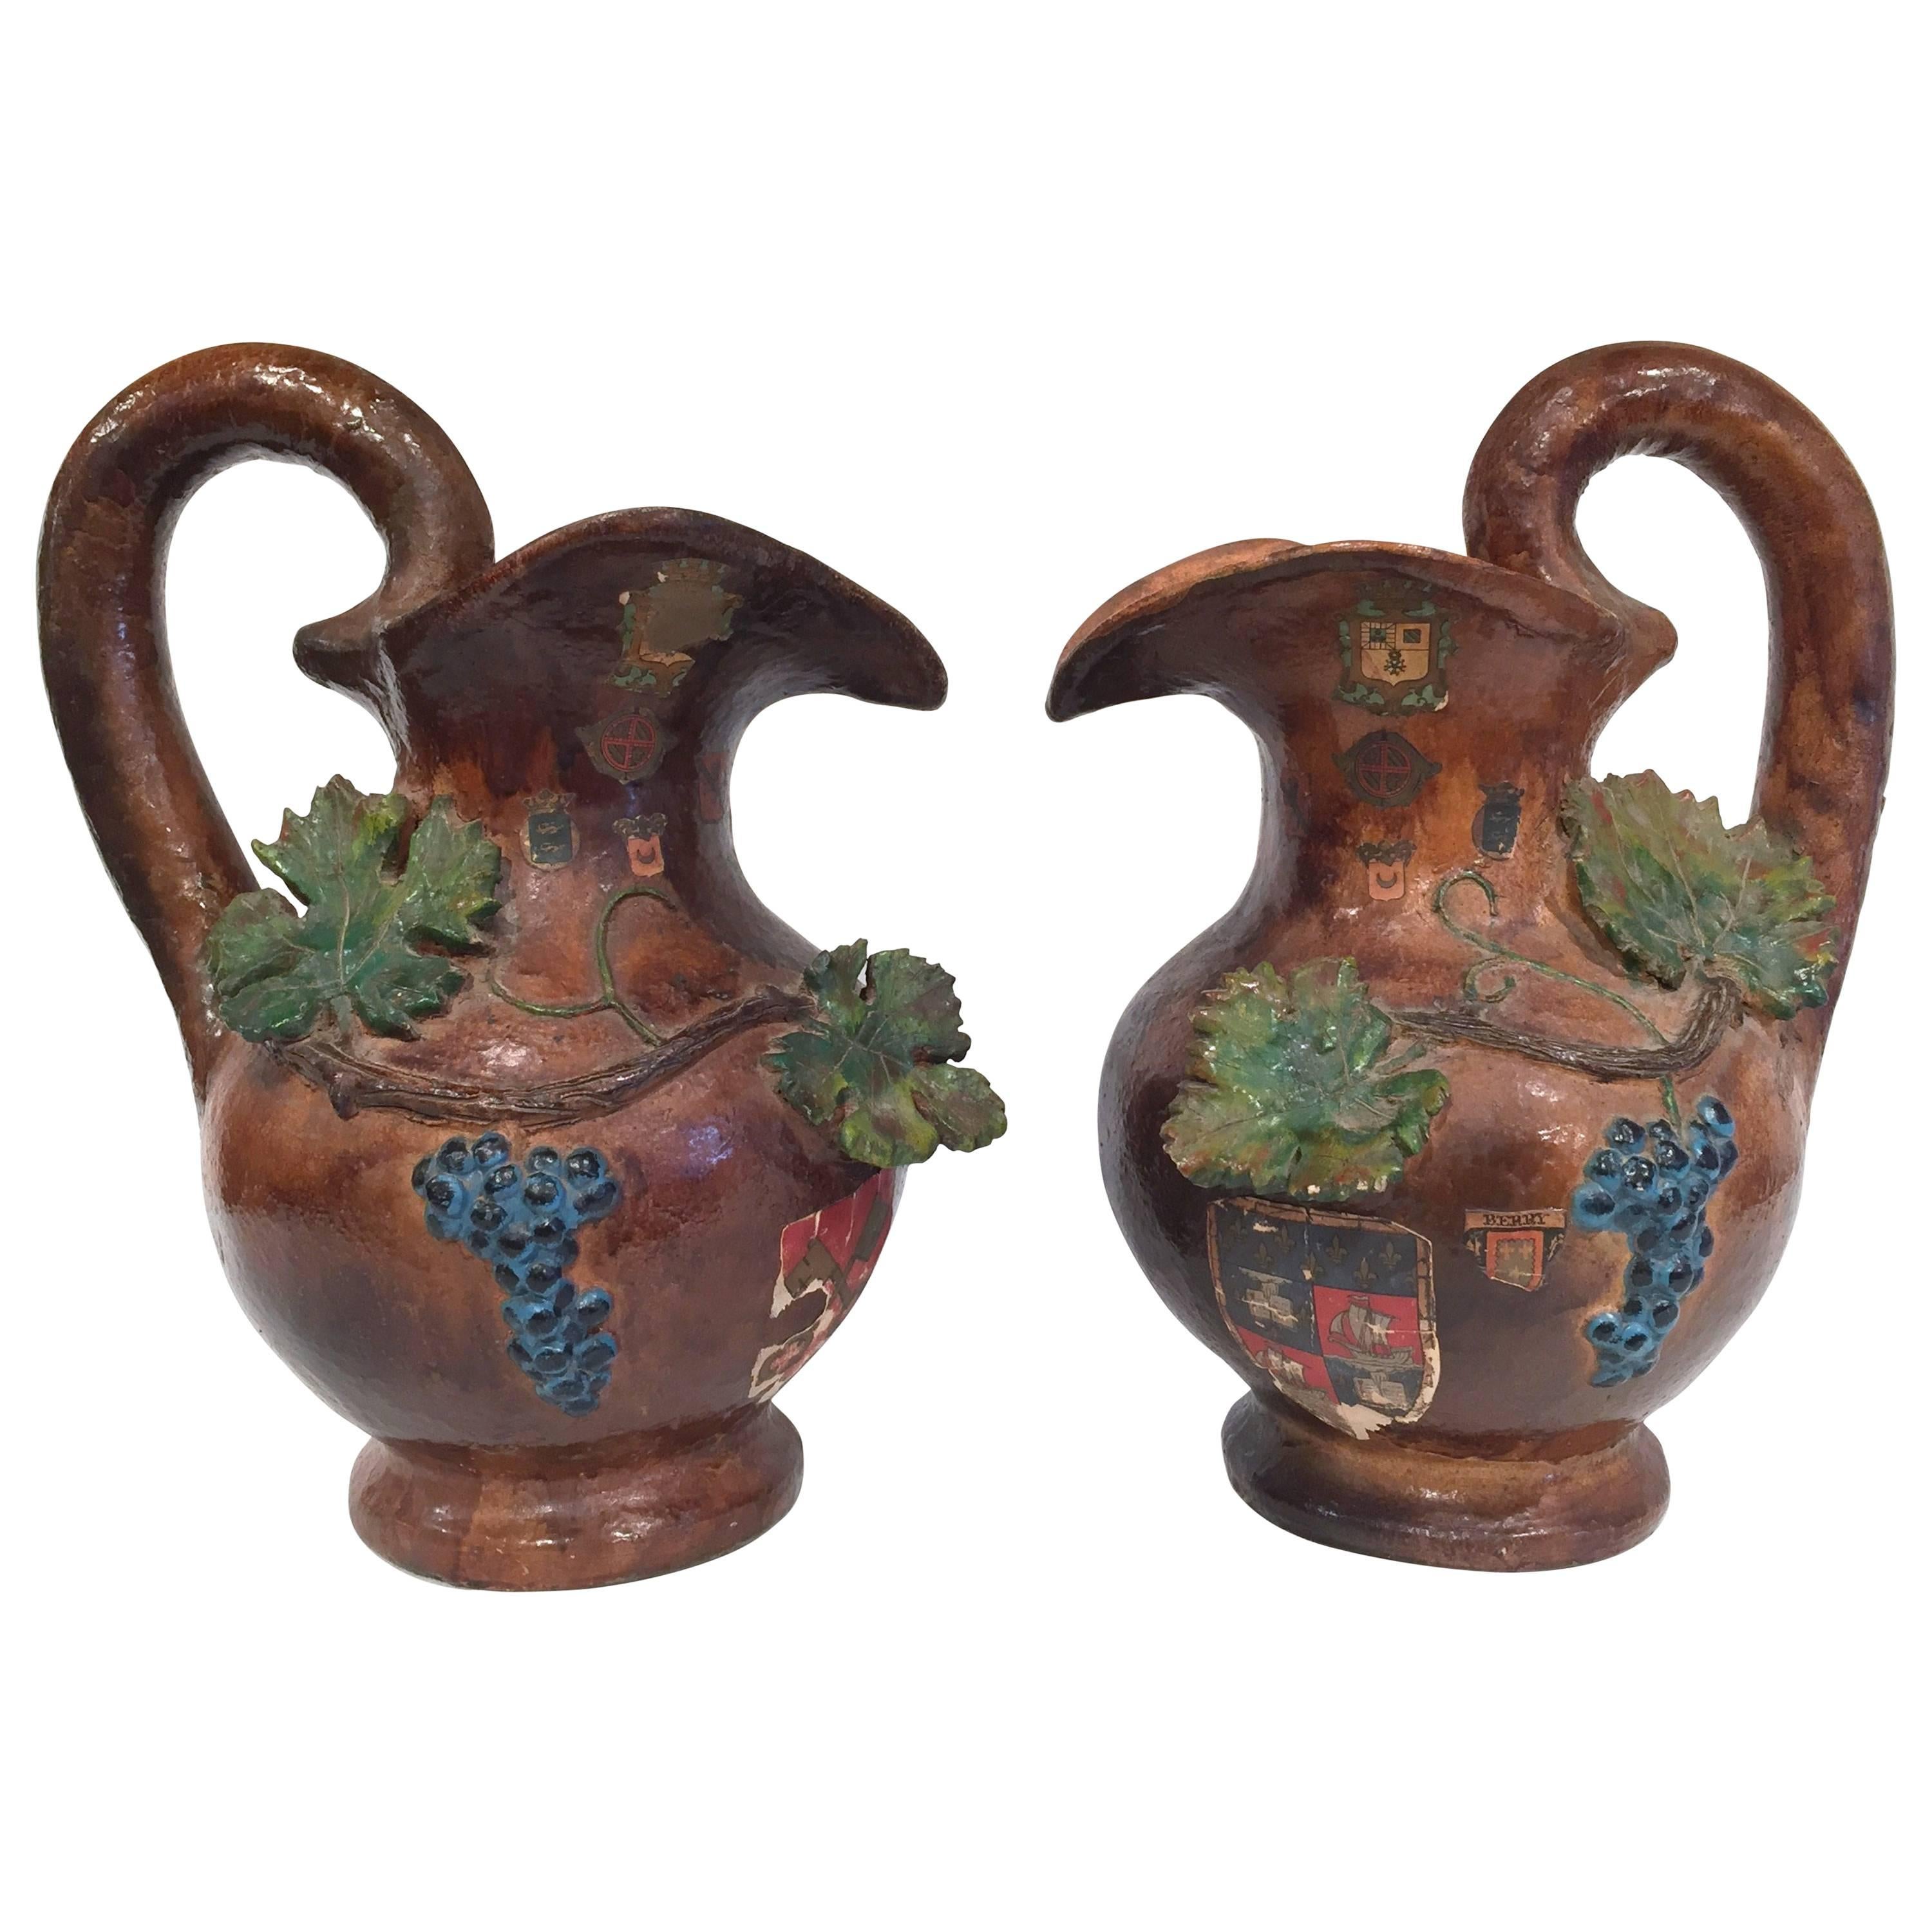 Pair of 19th Century French Painted Barbotine Wine Pitchers with Grapes & Vines